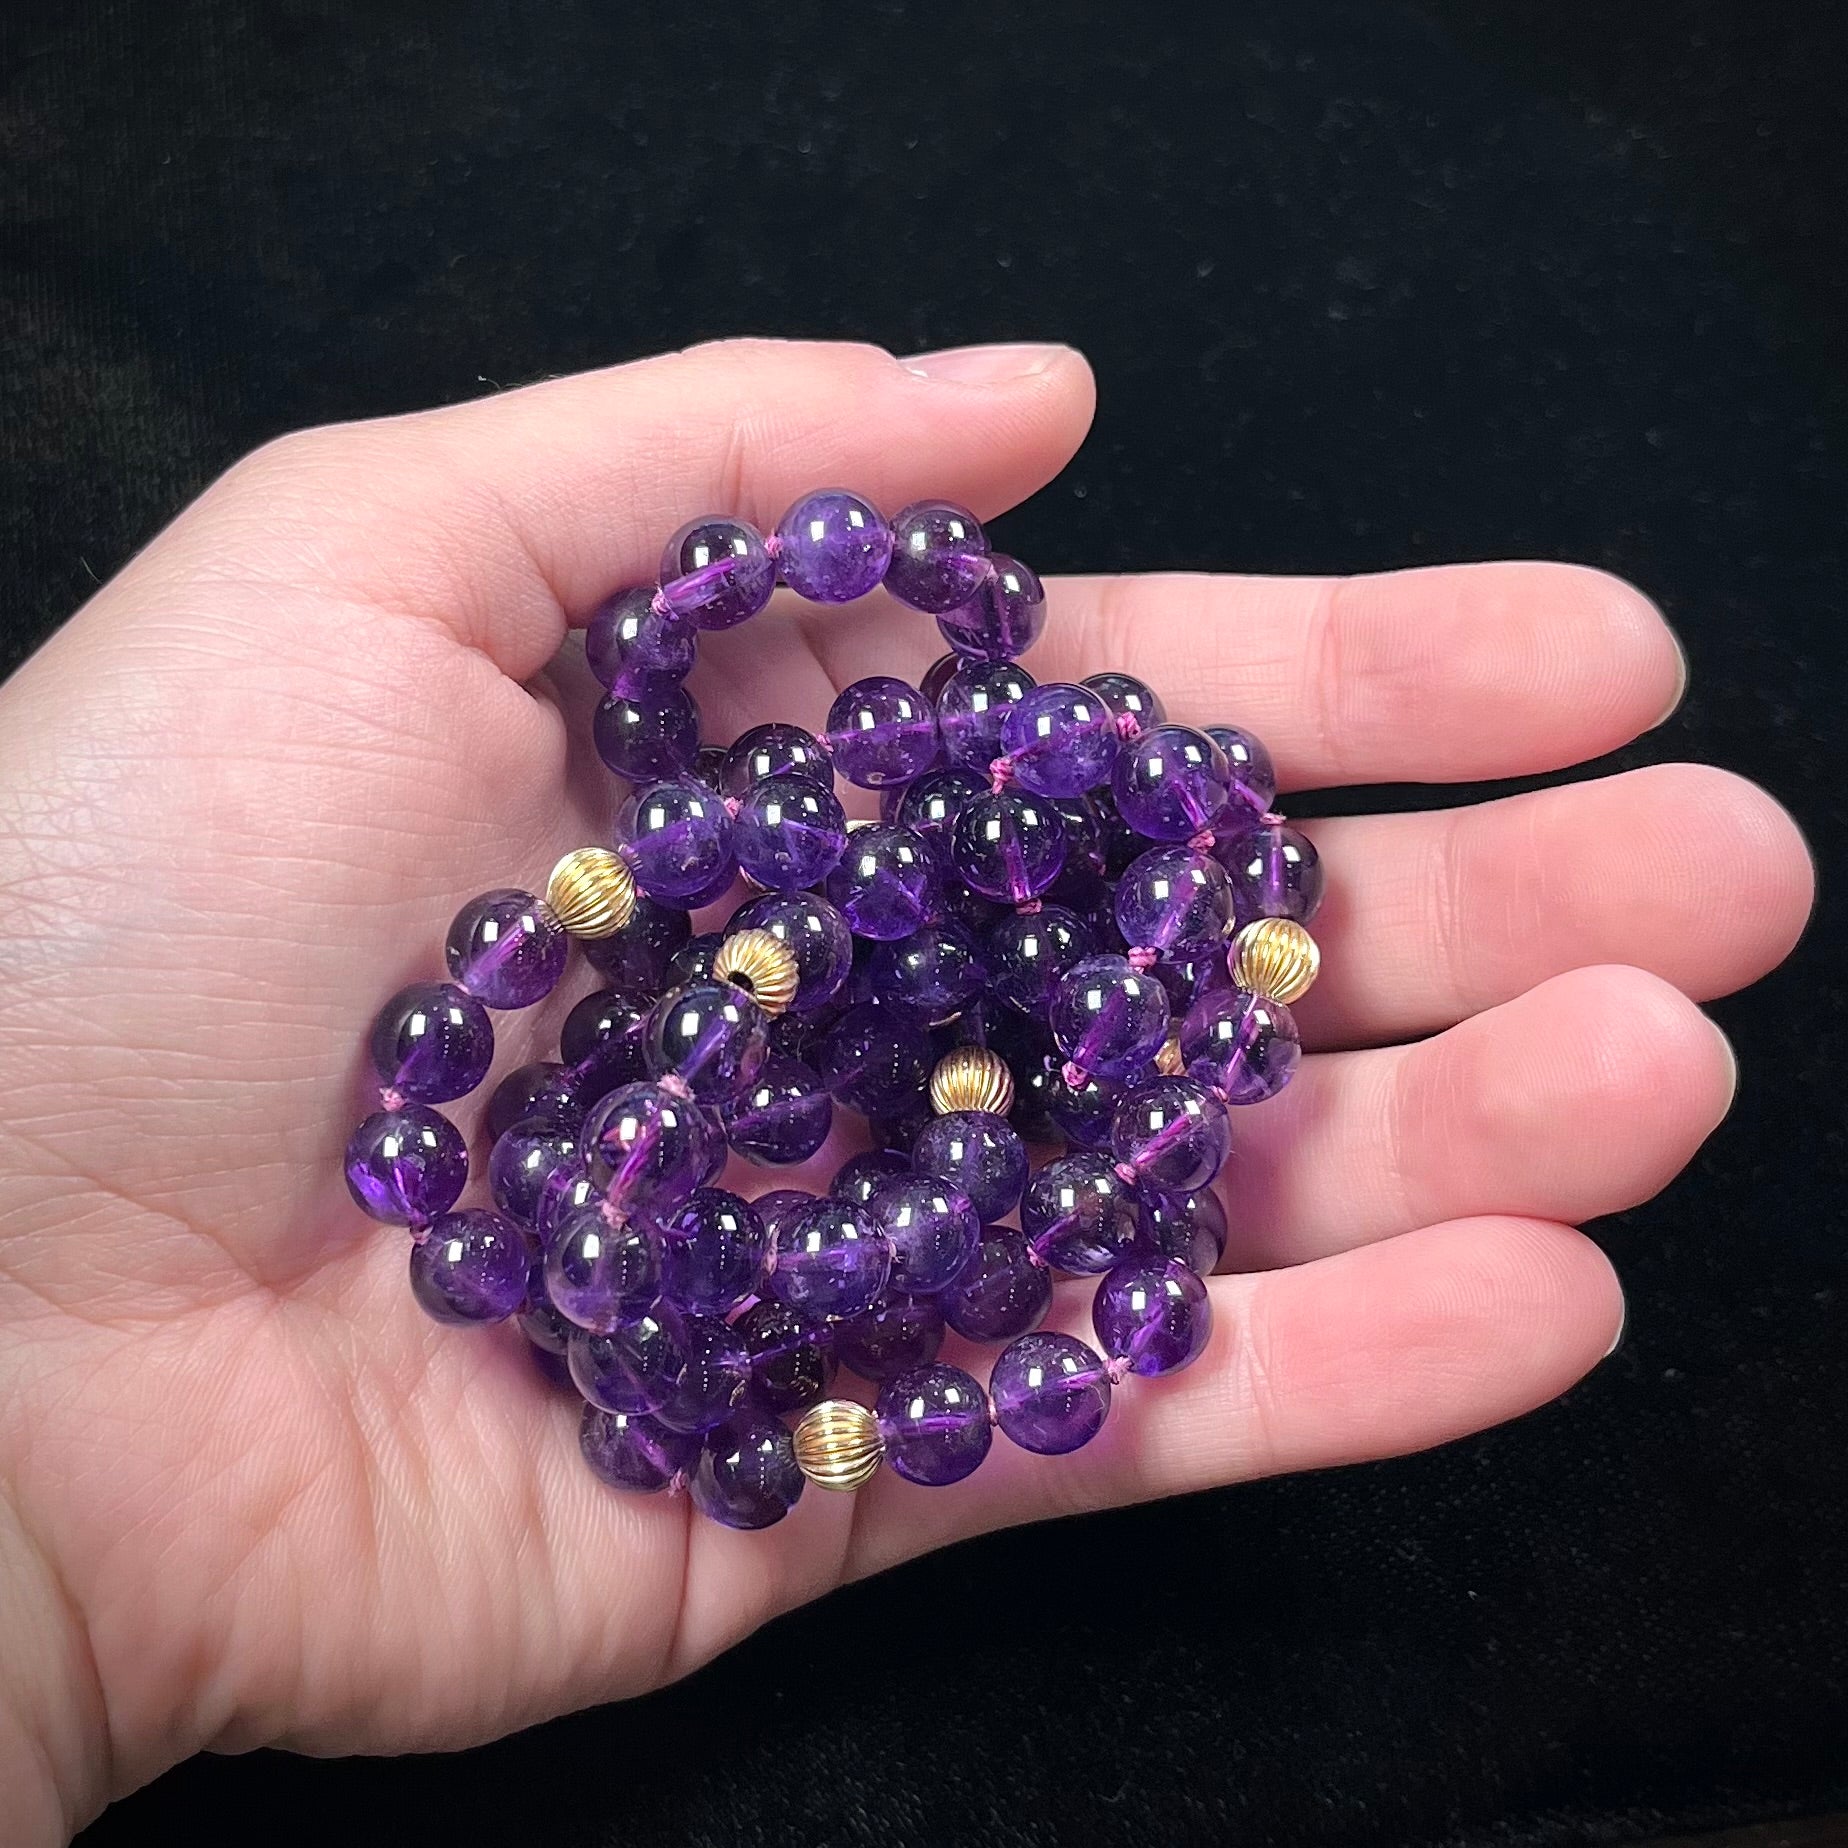 A beaded necklace made with round amethyst and 14k yellow gold beads.